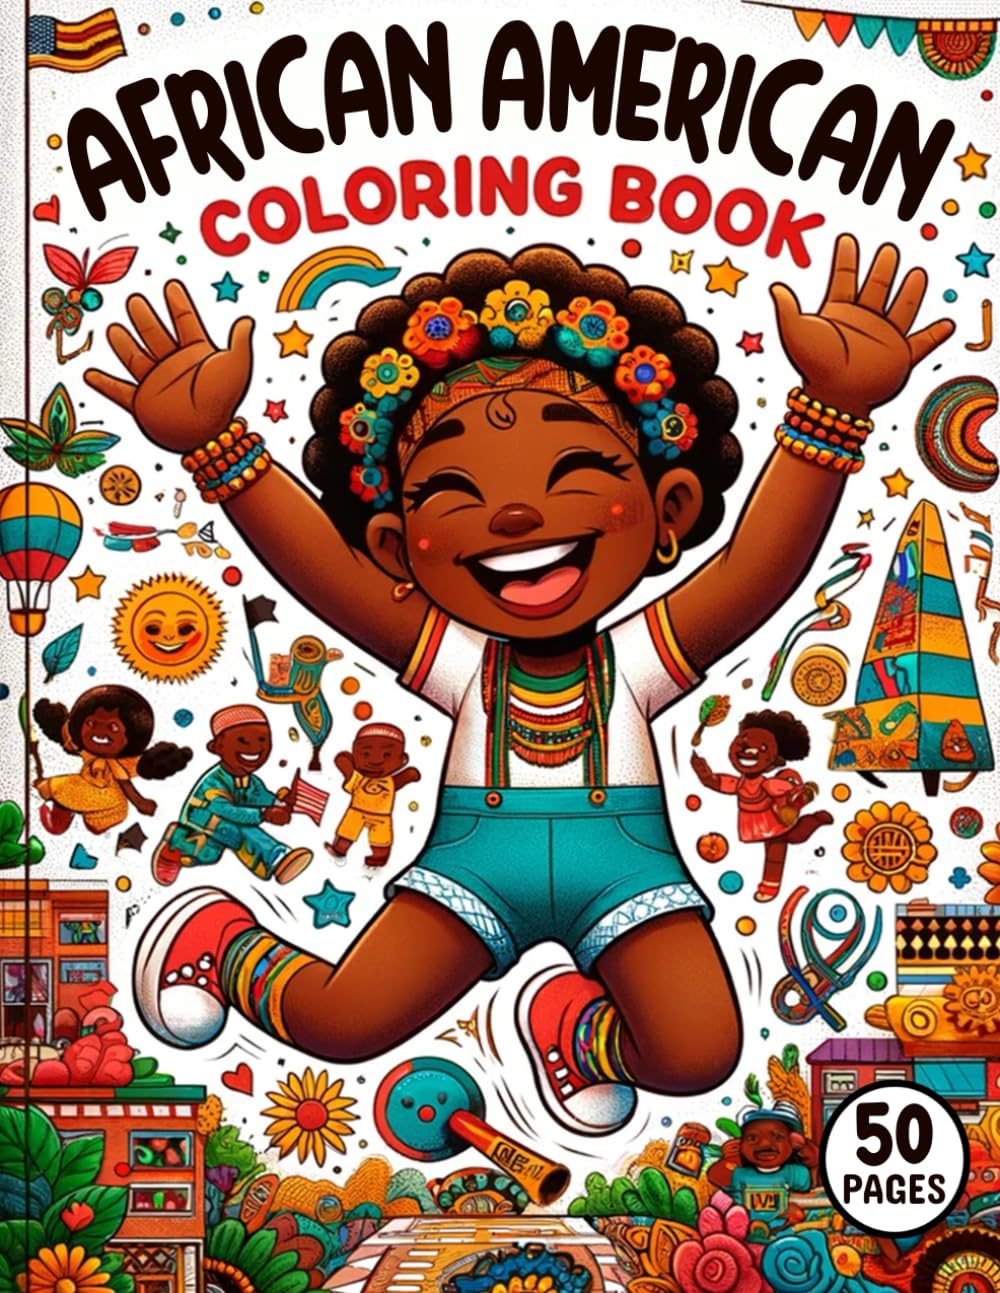 African American Coloring Book 50 Pages: Celebrate Heritage with Educational Illustrations - Learn, Color, and Discover. Perfect for Black and Brown Girls Boys Ages 4-12